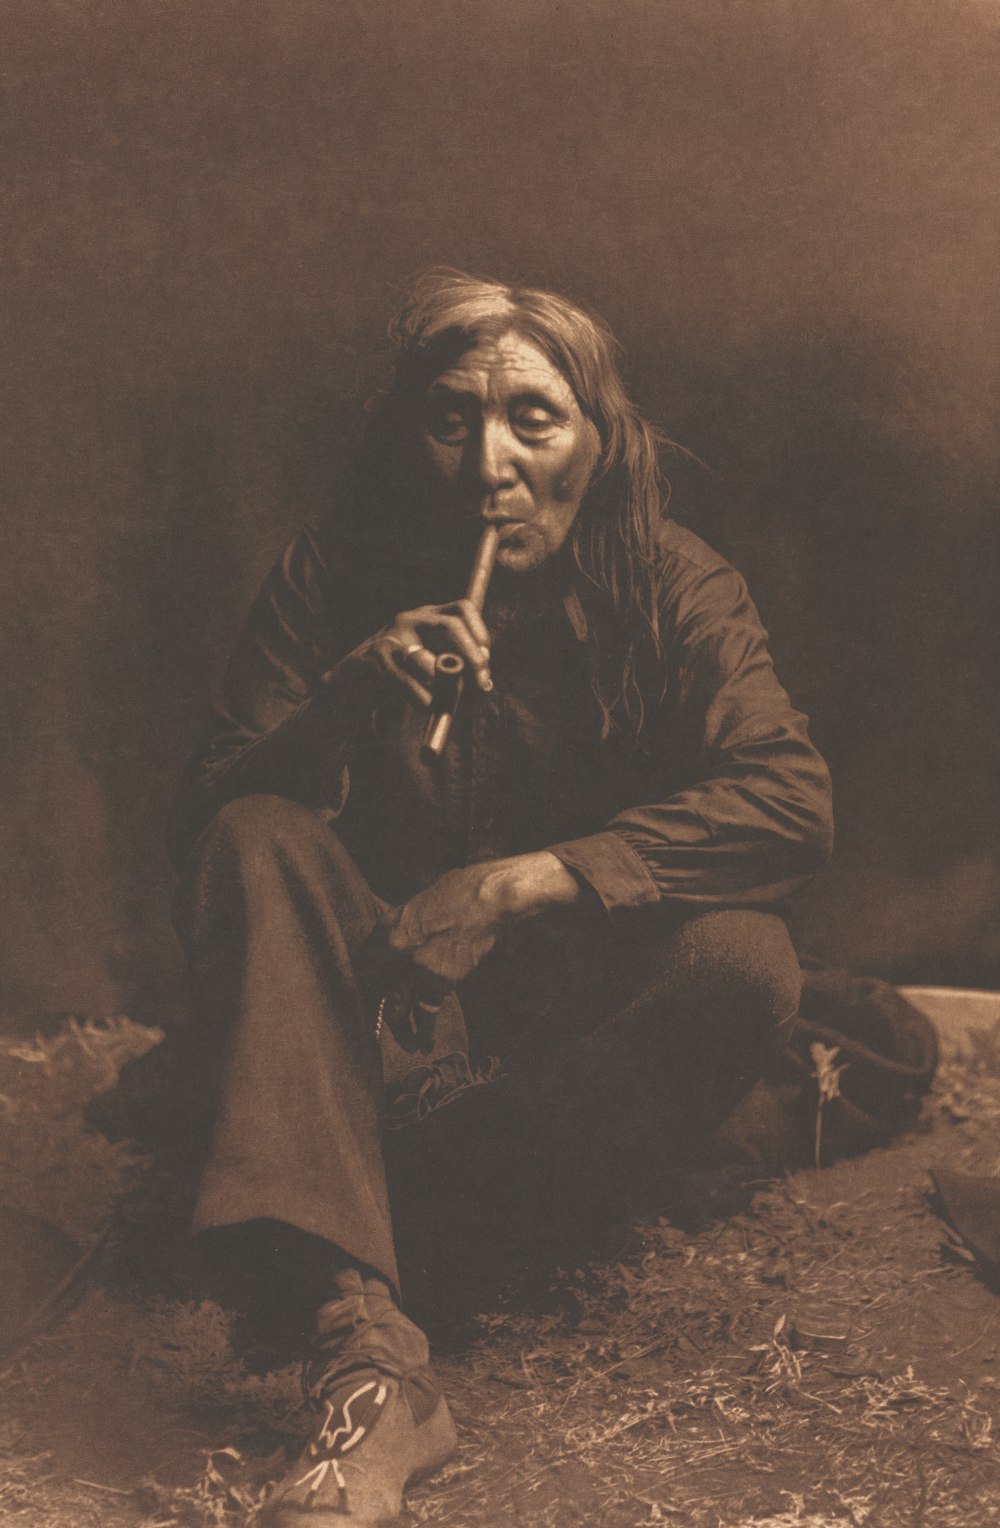 an old photo of a native american man smoking a pipe